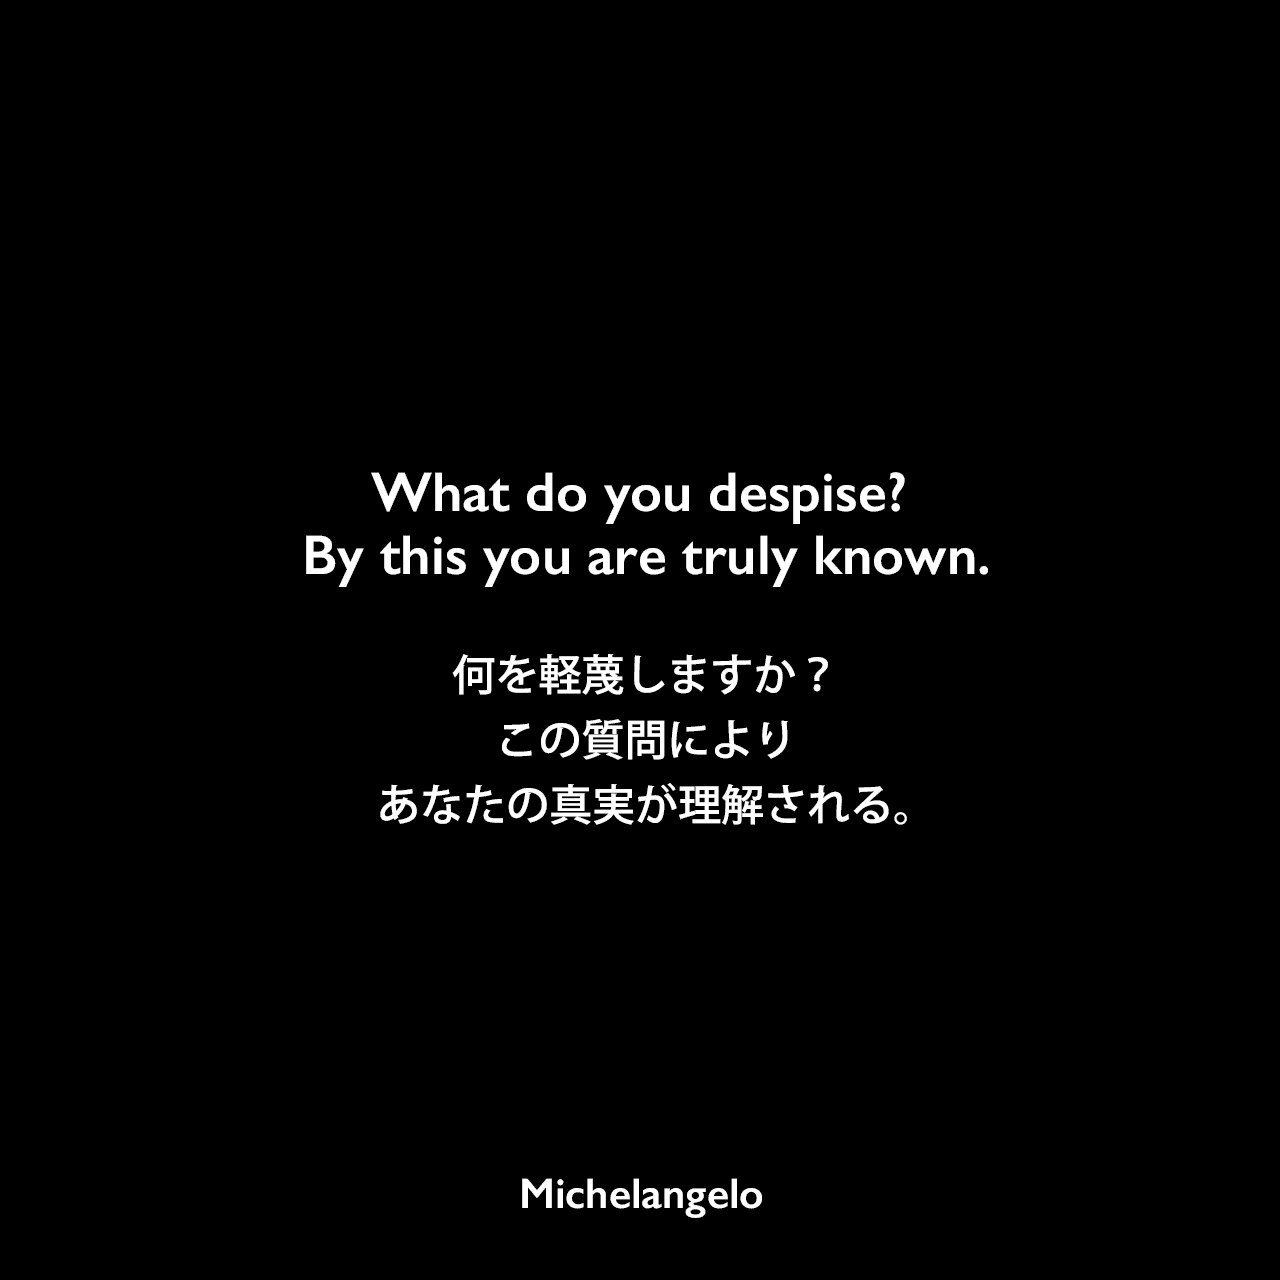 What do you despise? By this you are truly known.何を軽蔑しますか？この質問によりあなたの真実が理解される。Michelangelo